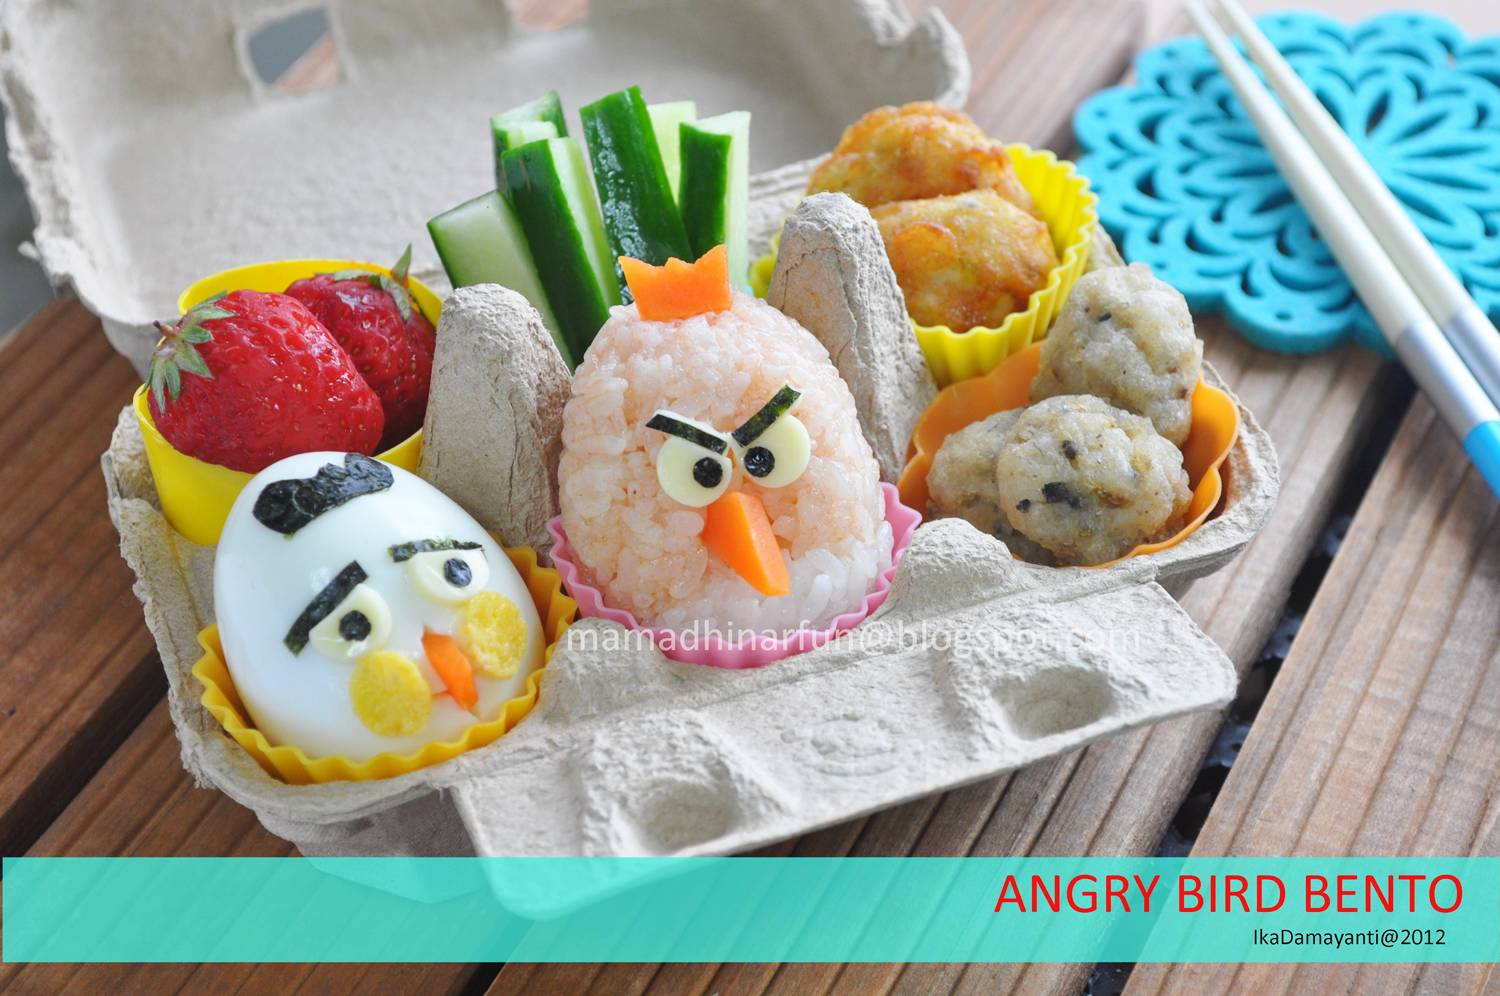 Journey of learning: Angry Bird Bento